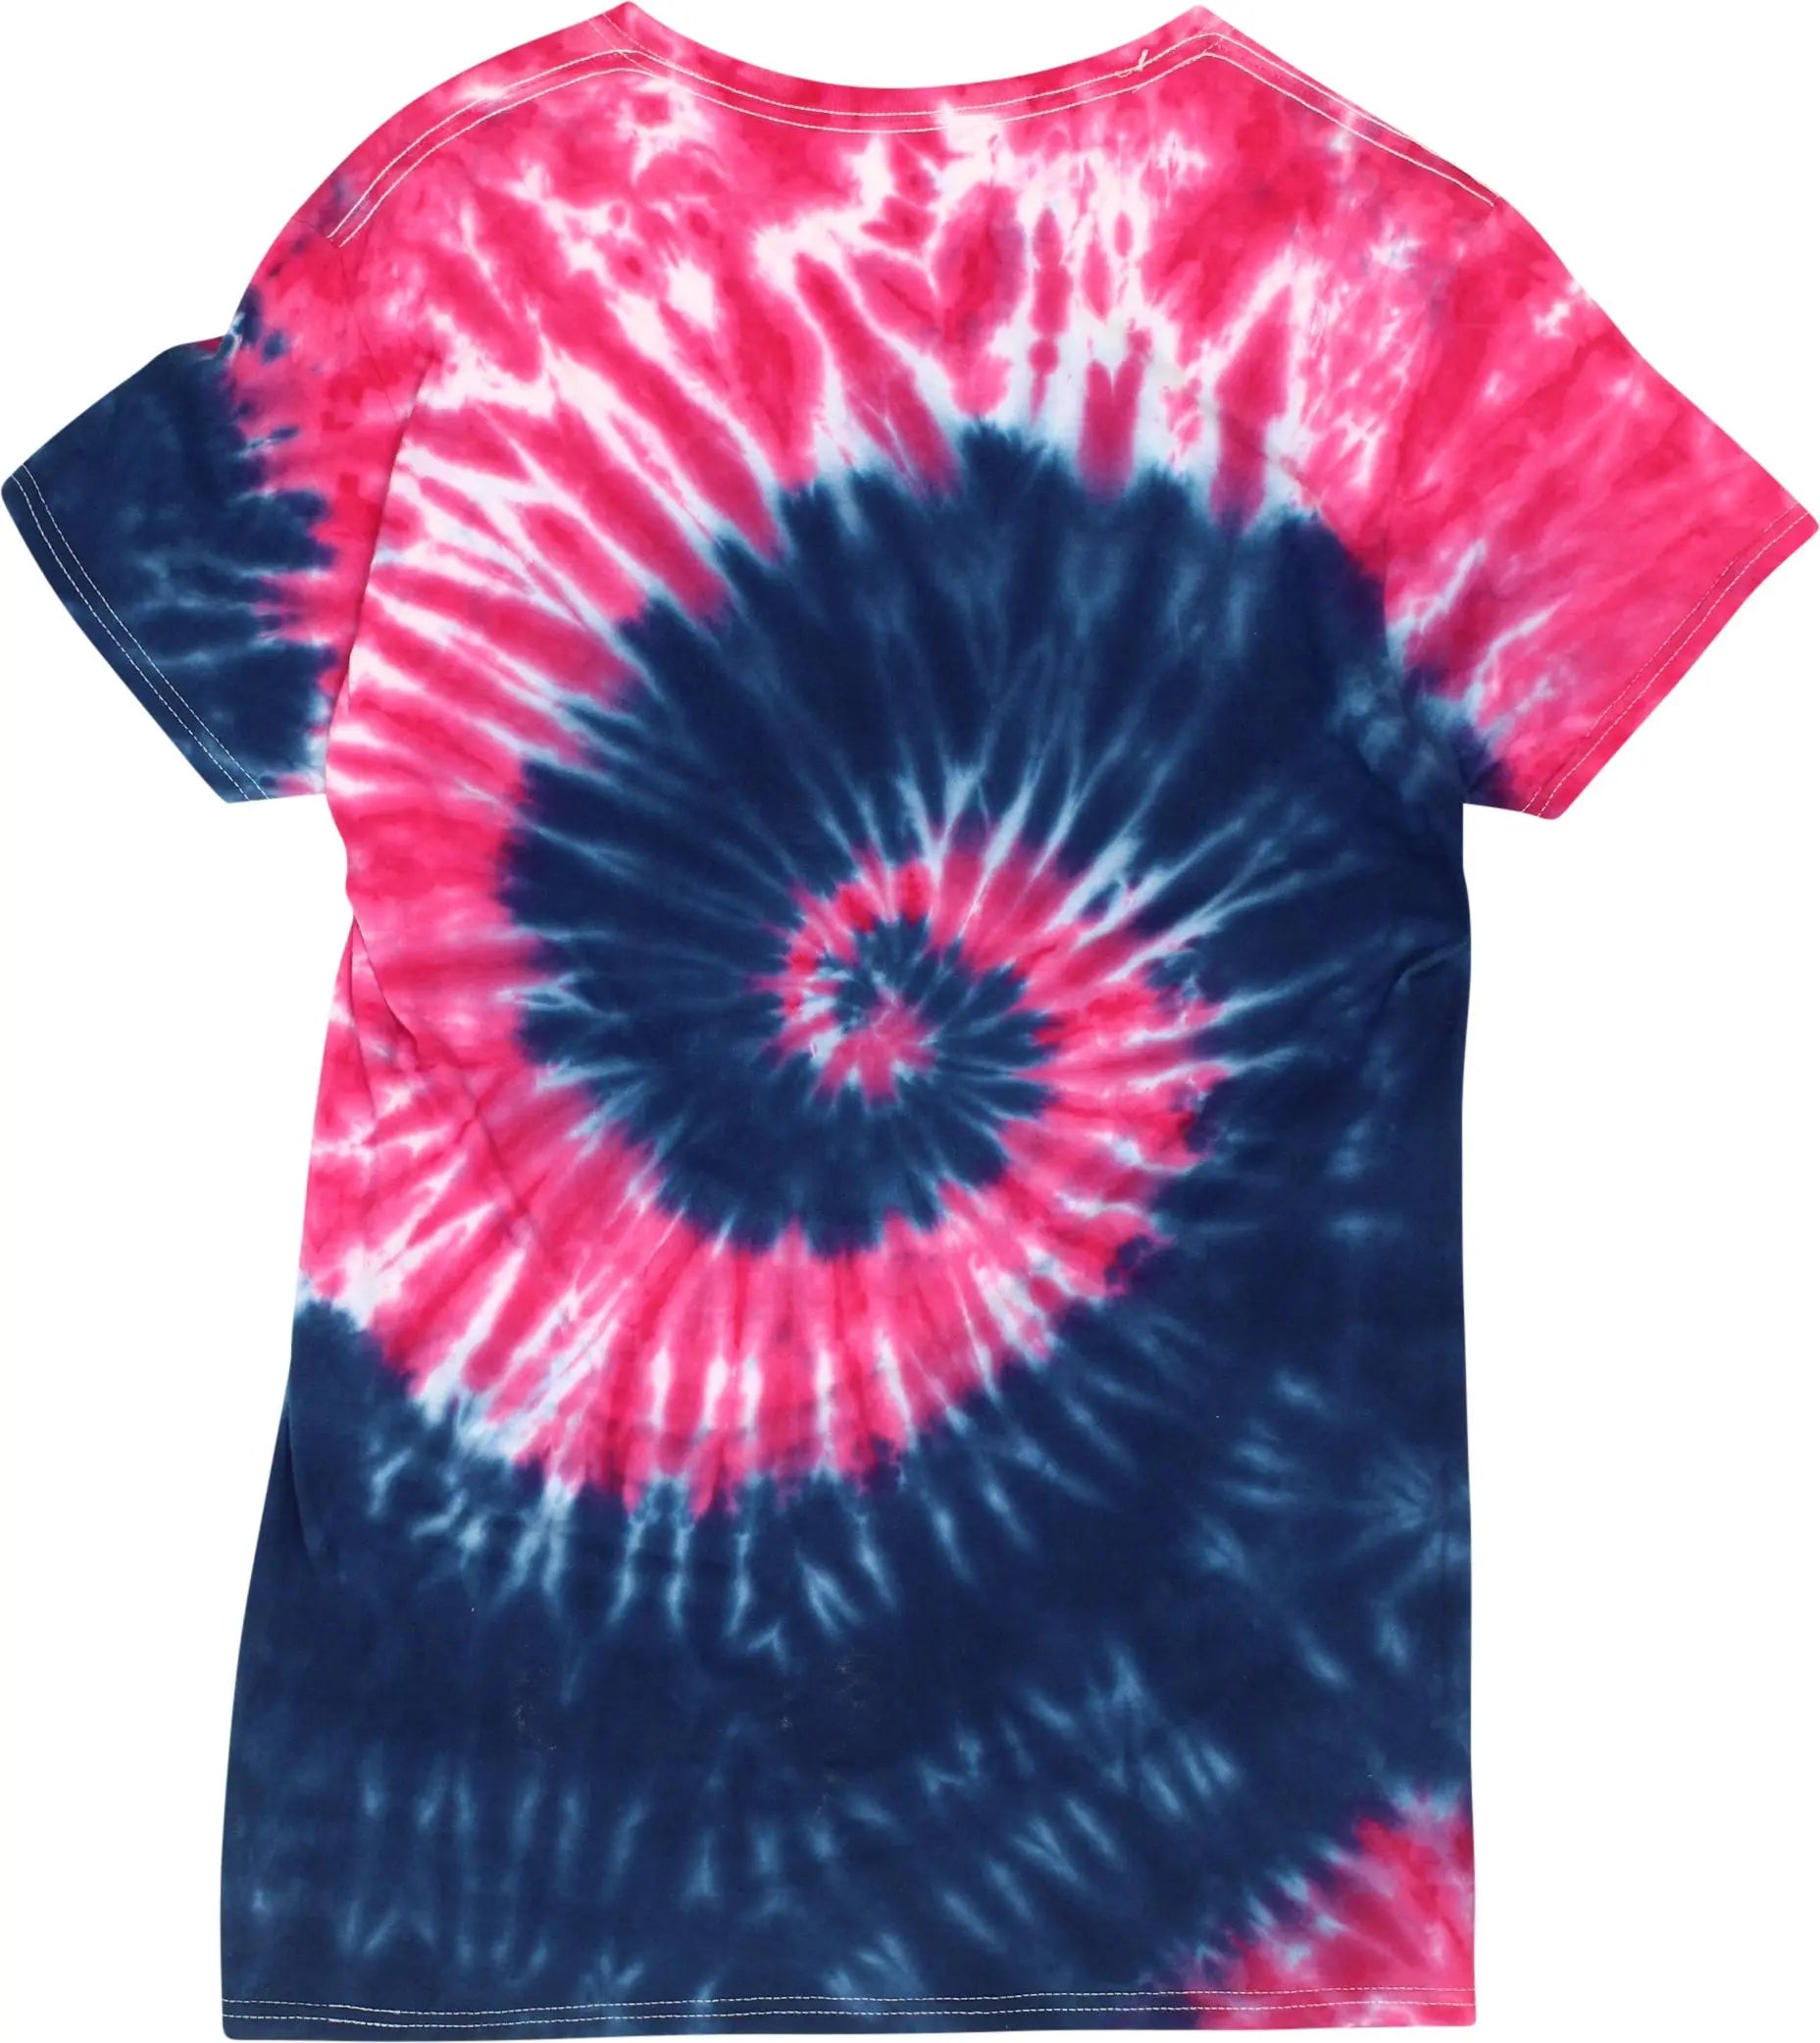 Fruit of the Loom - Graphic Tie Dye T-Shirt- ThriftTale.com - Vintage and second handclothing